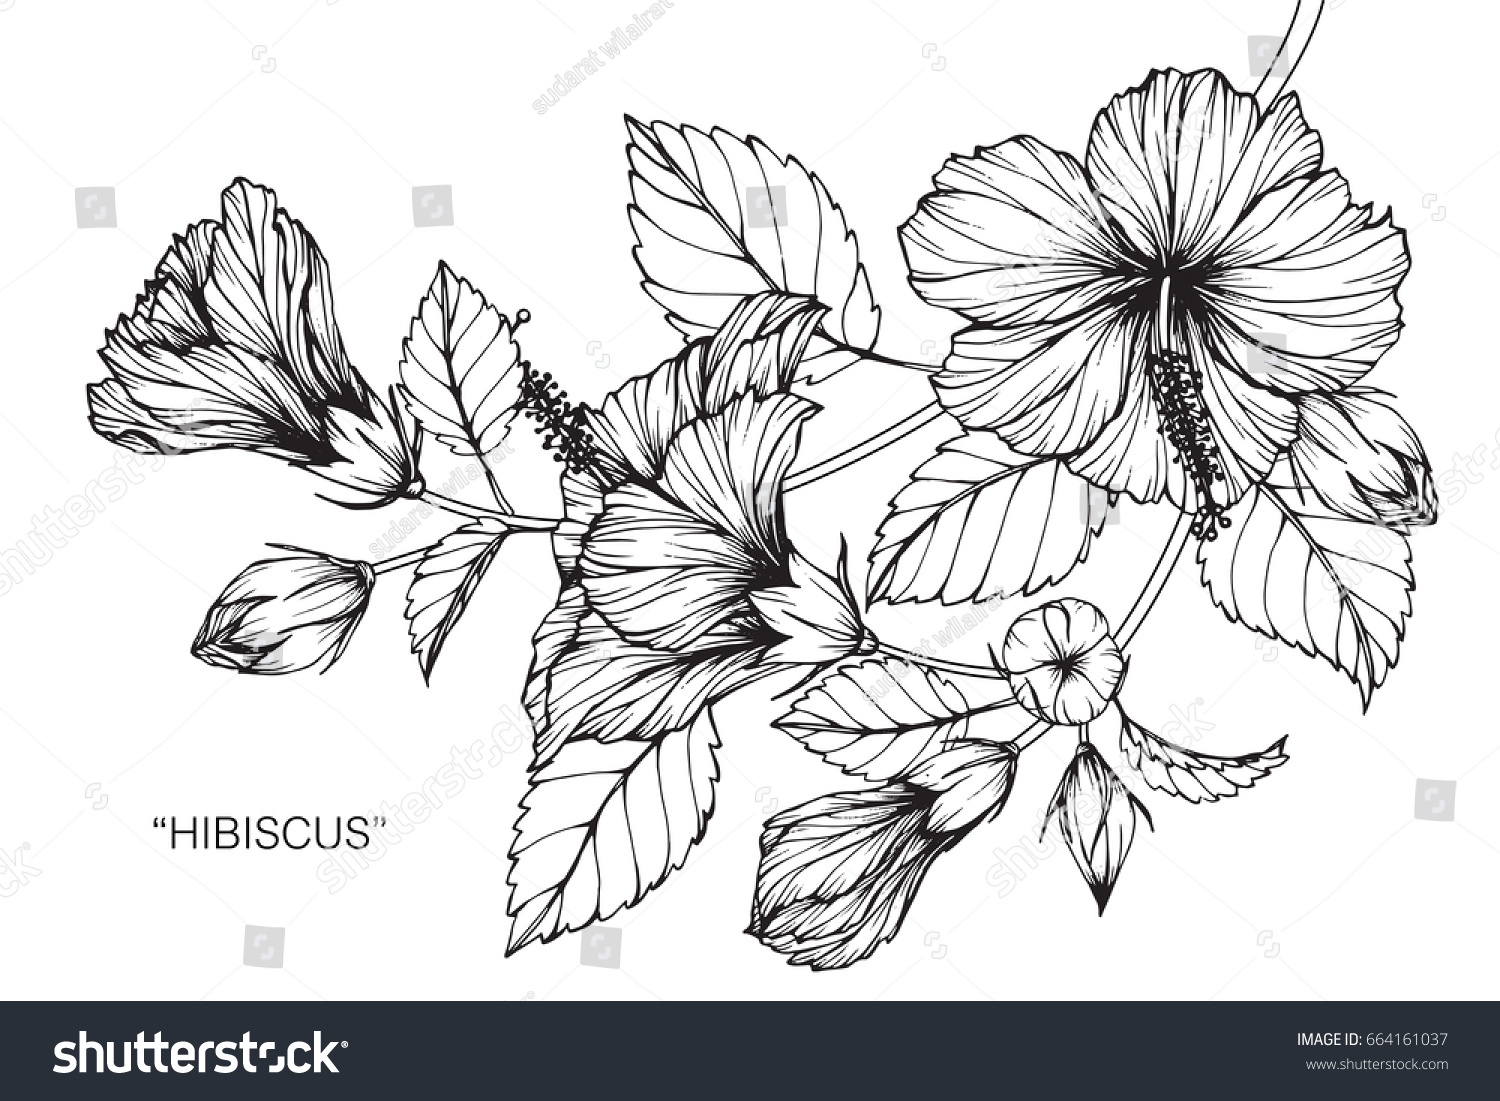  Hibiscus Flowers Drawing Sketch Lineart On Stock Vector 664161037 